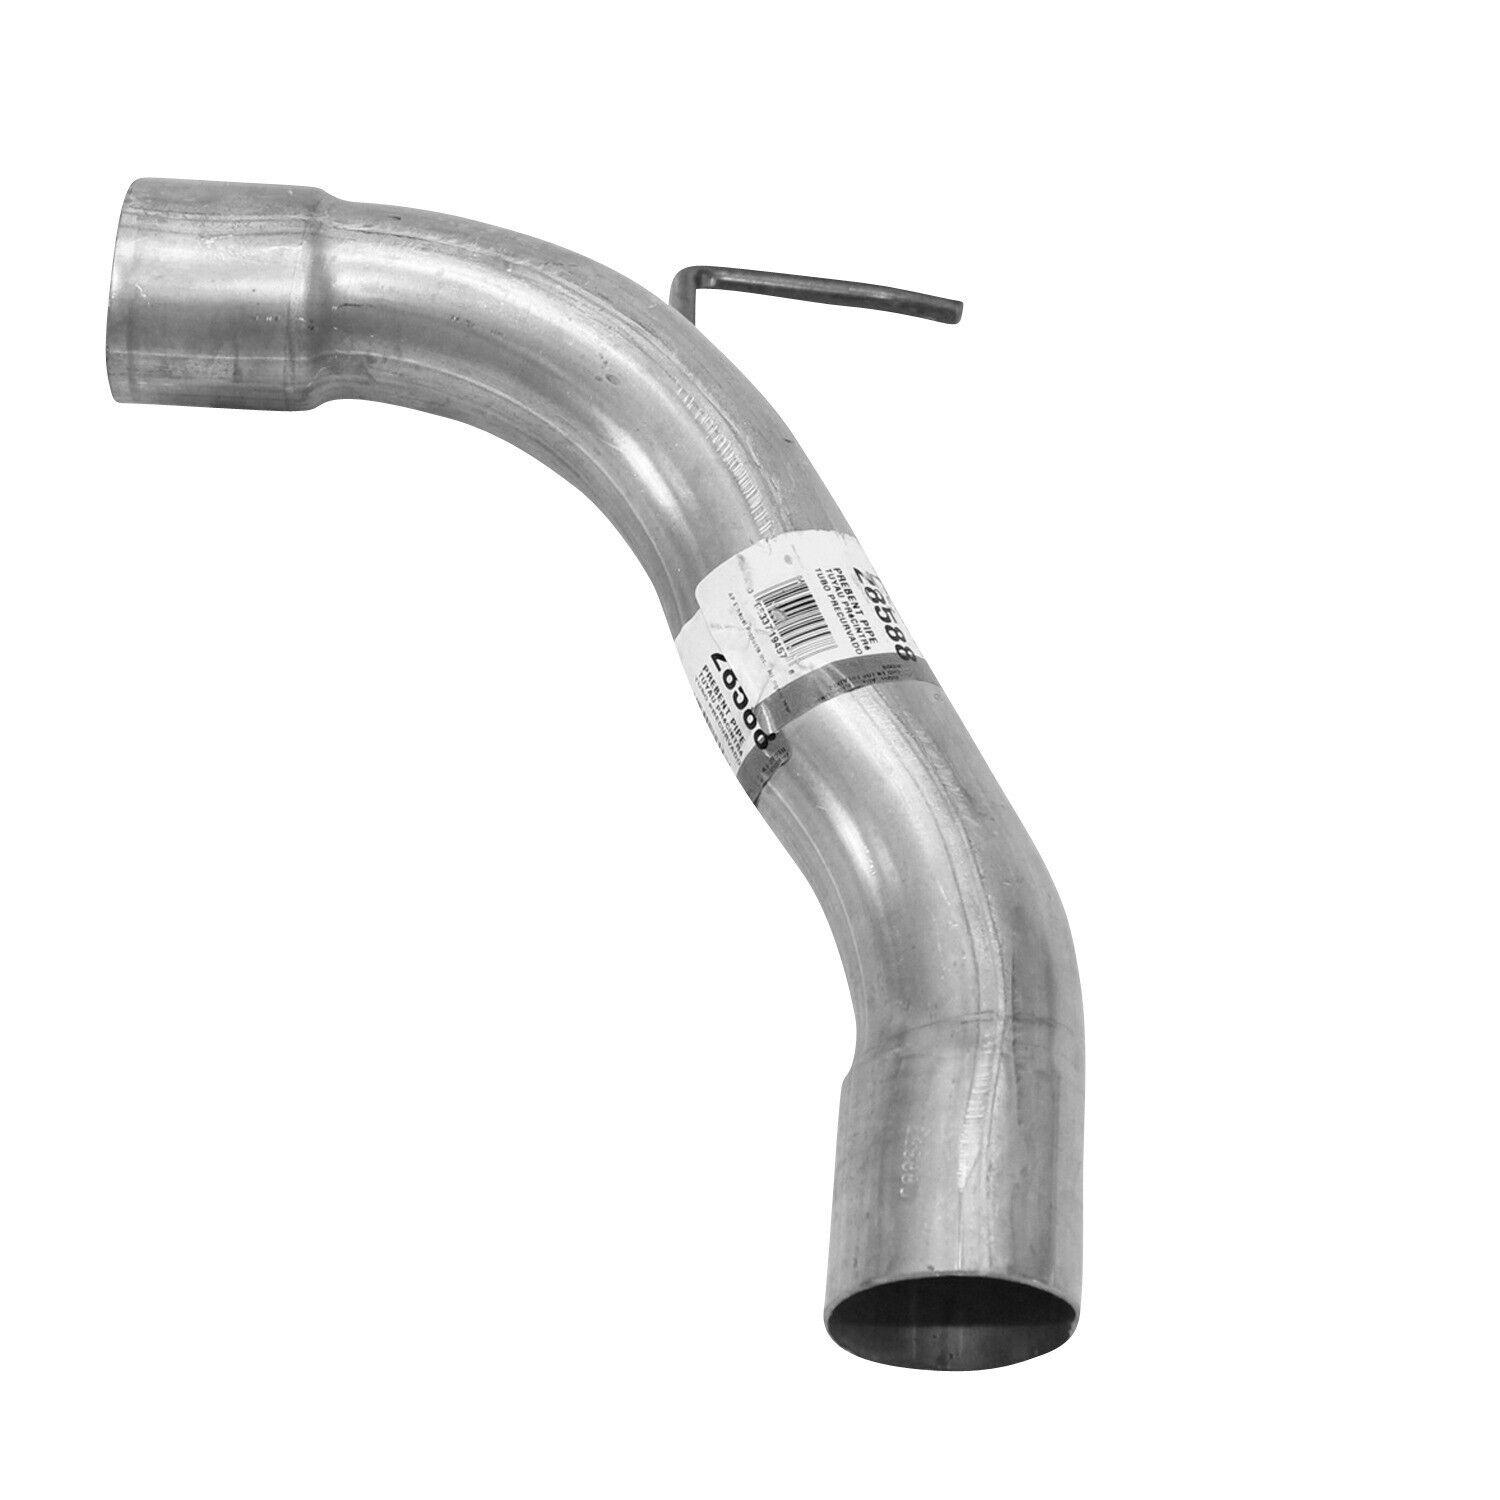 AP Exhaust Exhaust Pipe for 300M, Concorde, Intrepid, LHS 28588